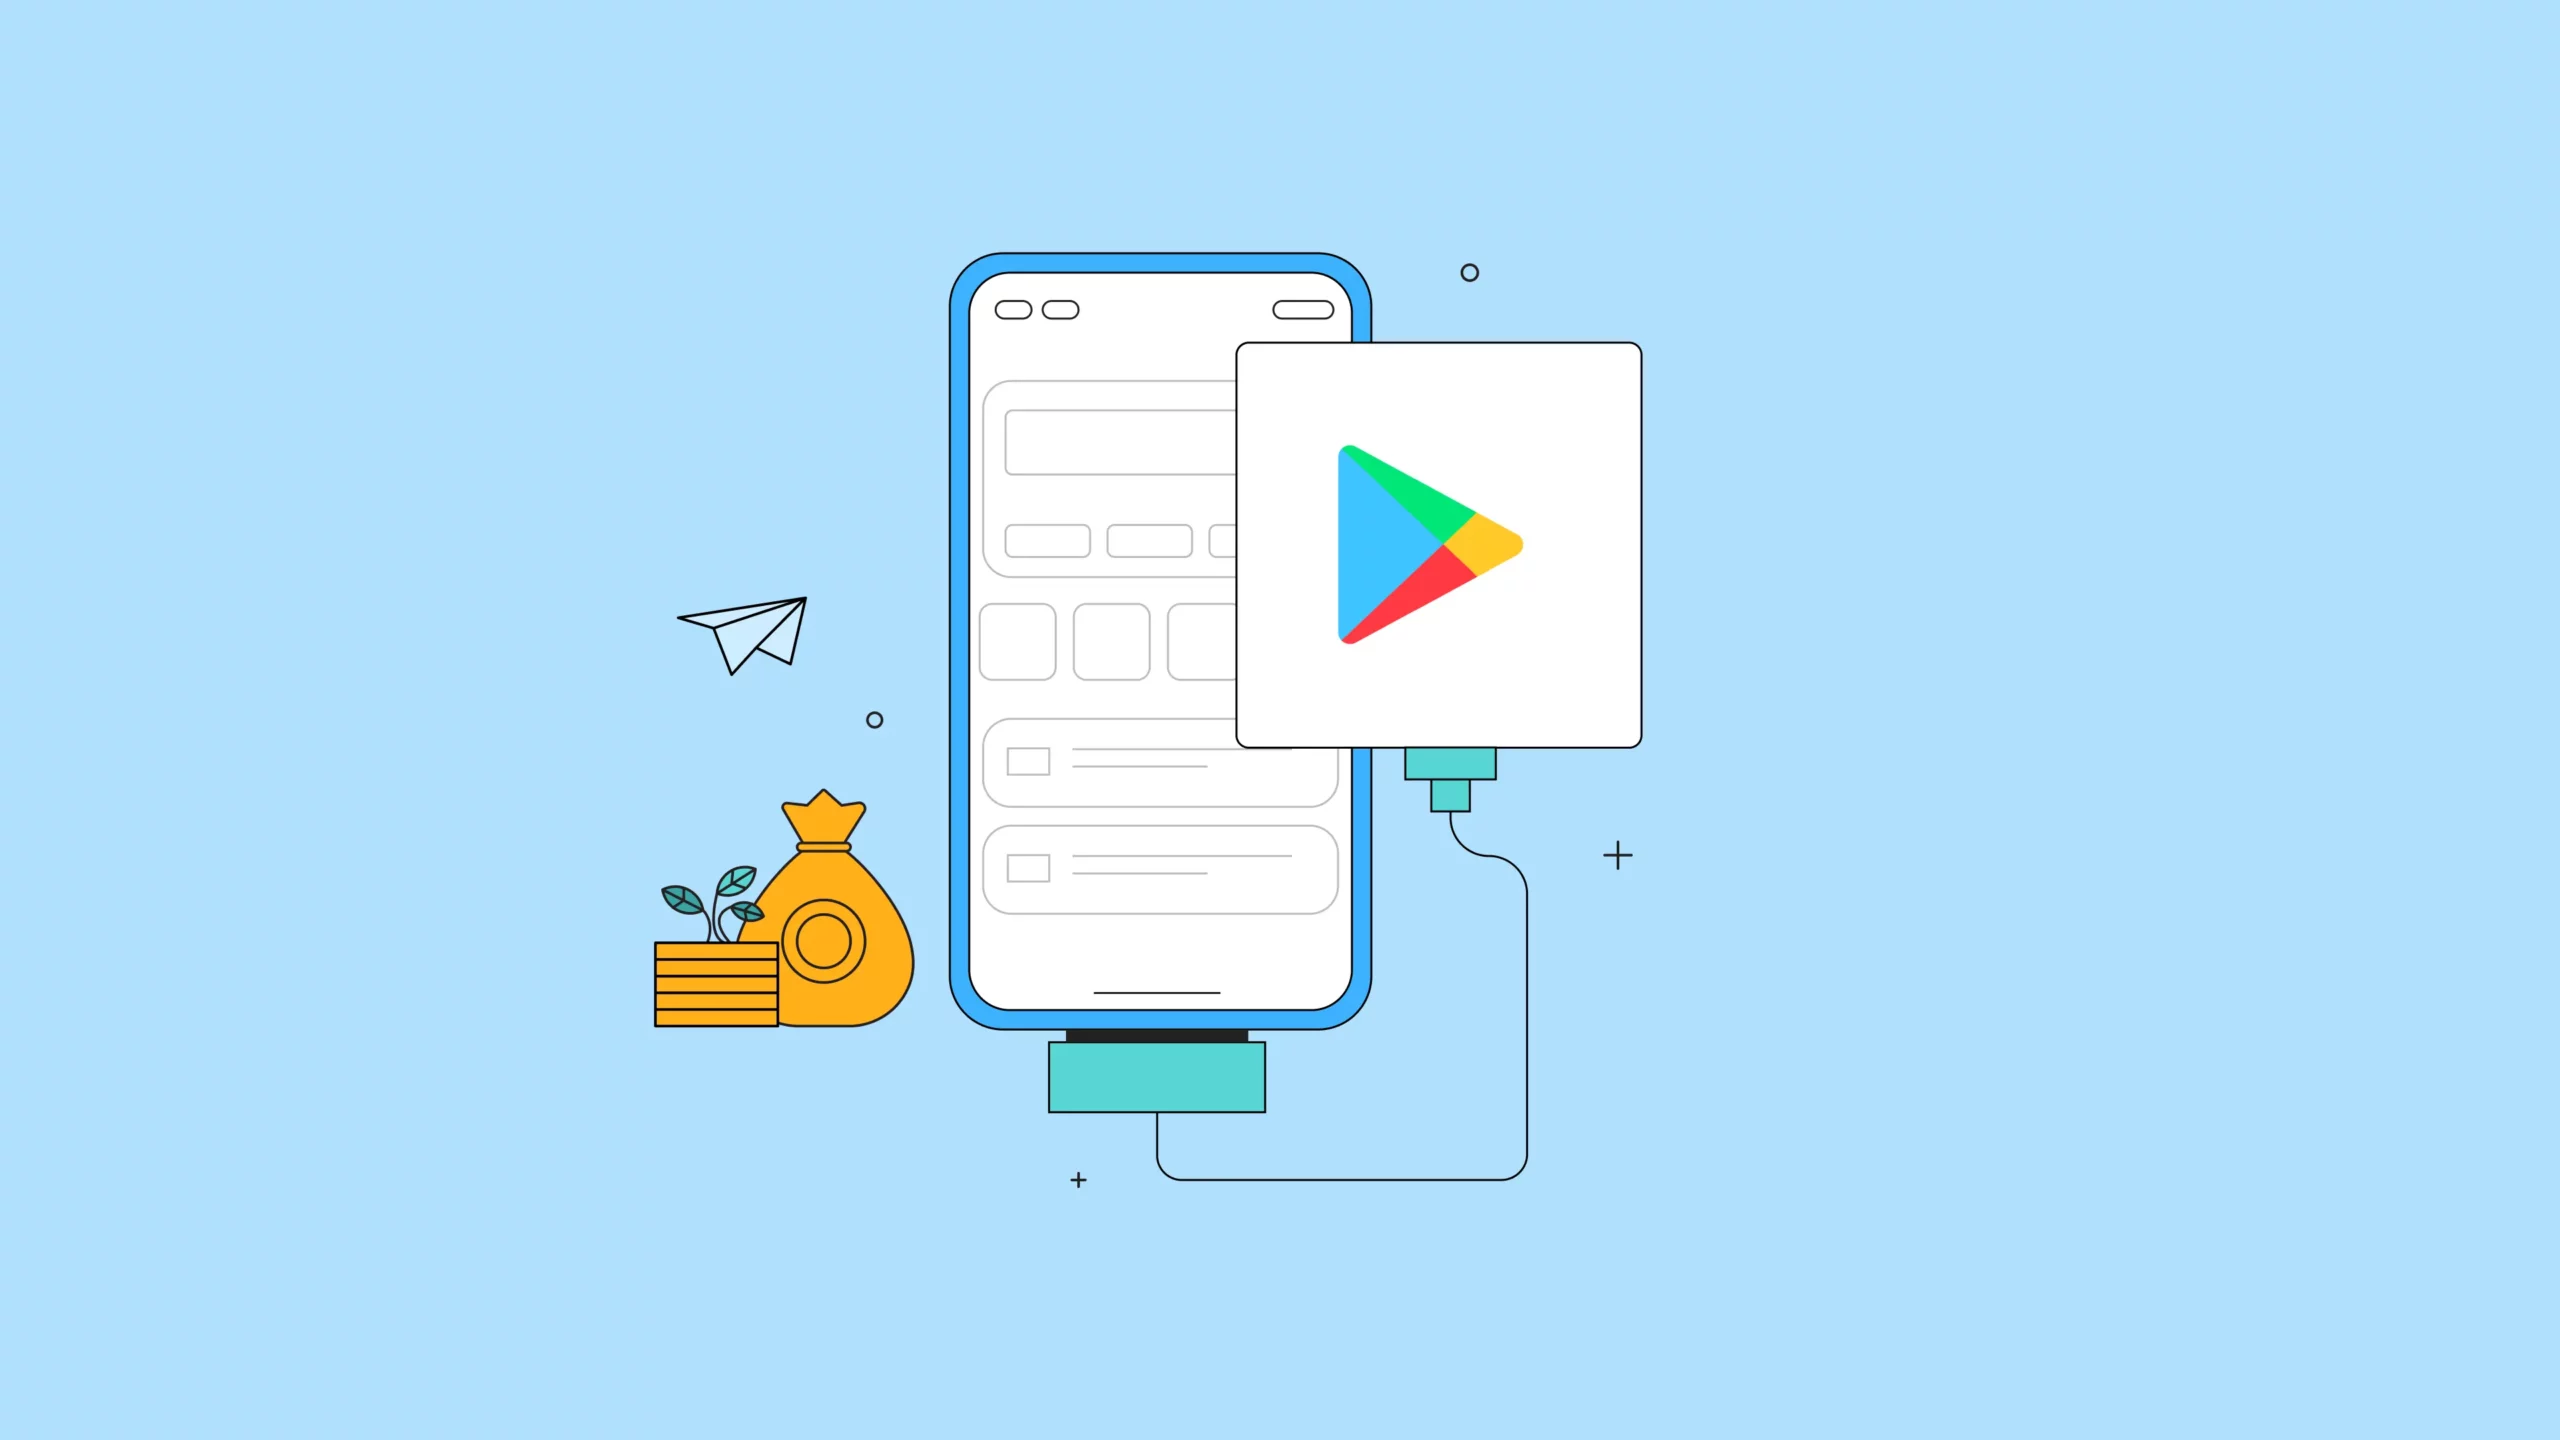 Requirements for publishing Nigerian loan apps on Google Play Store